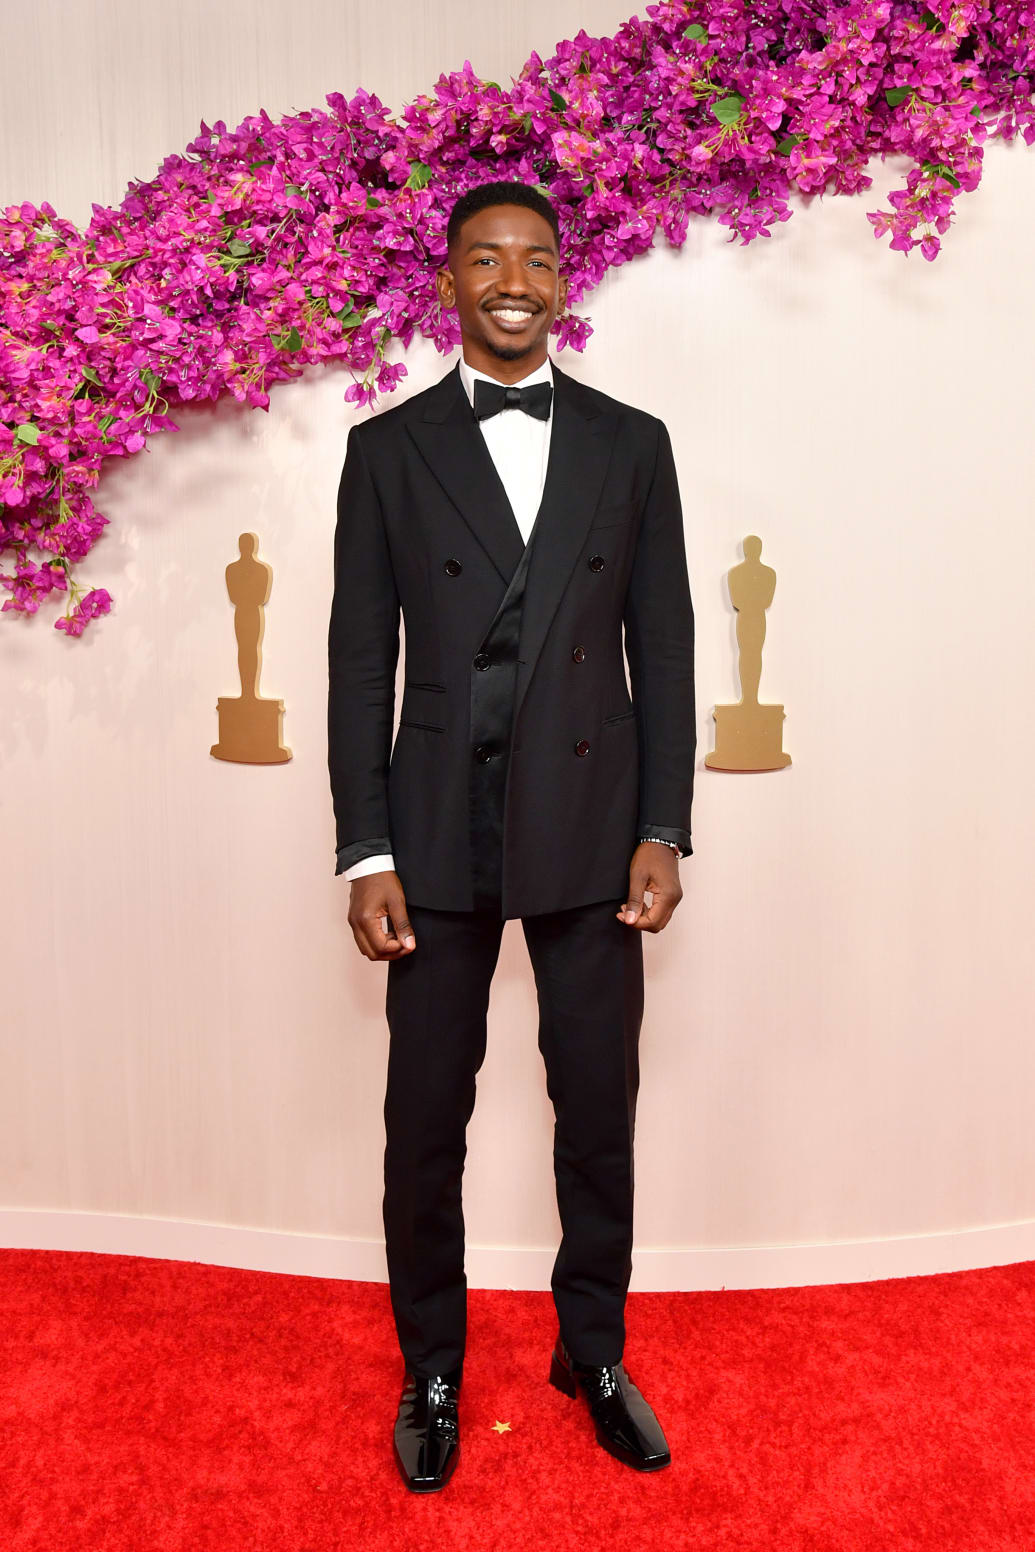 Mamoudou Athie at the Oscars